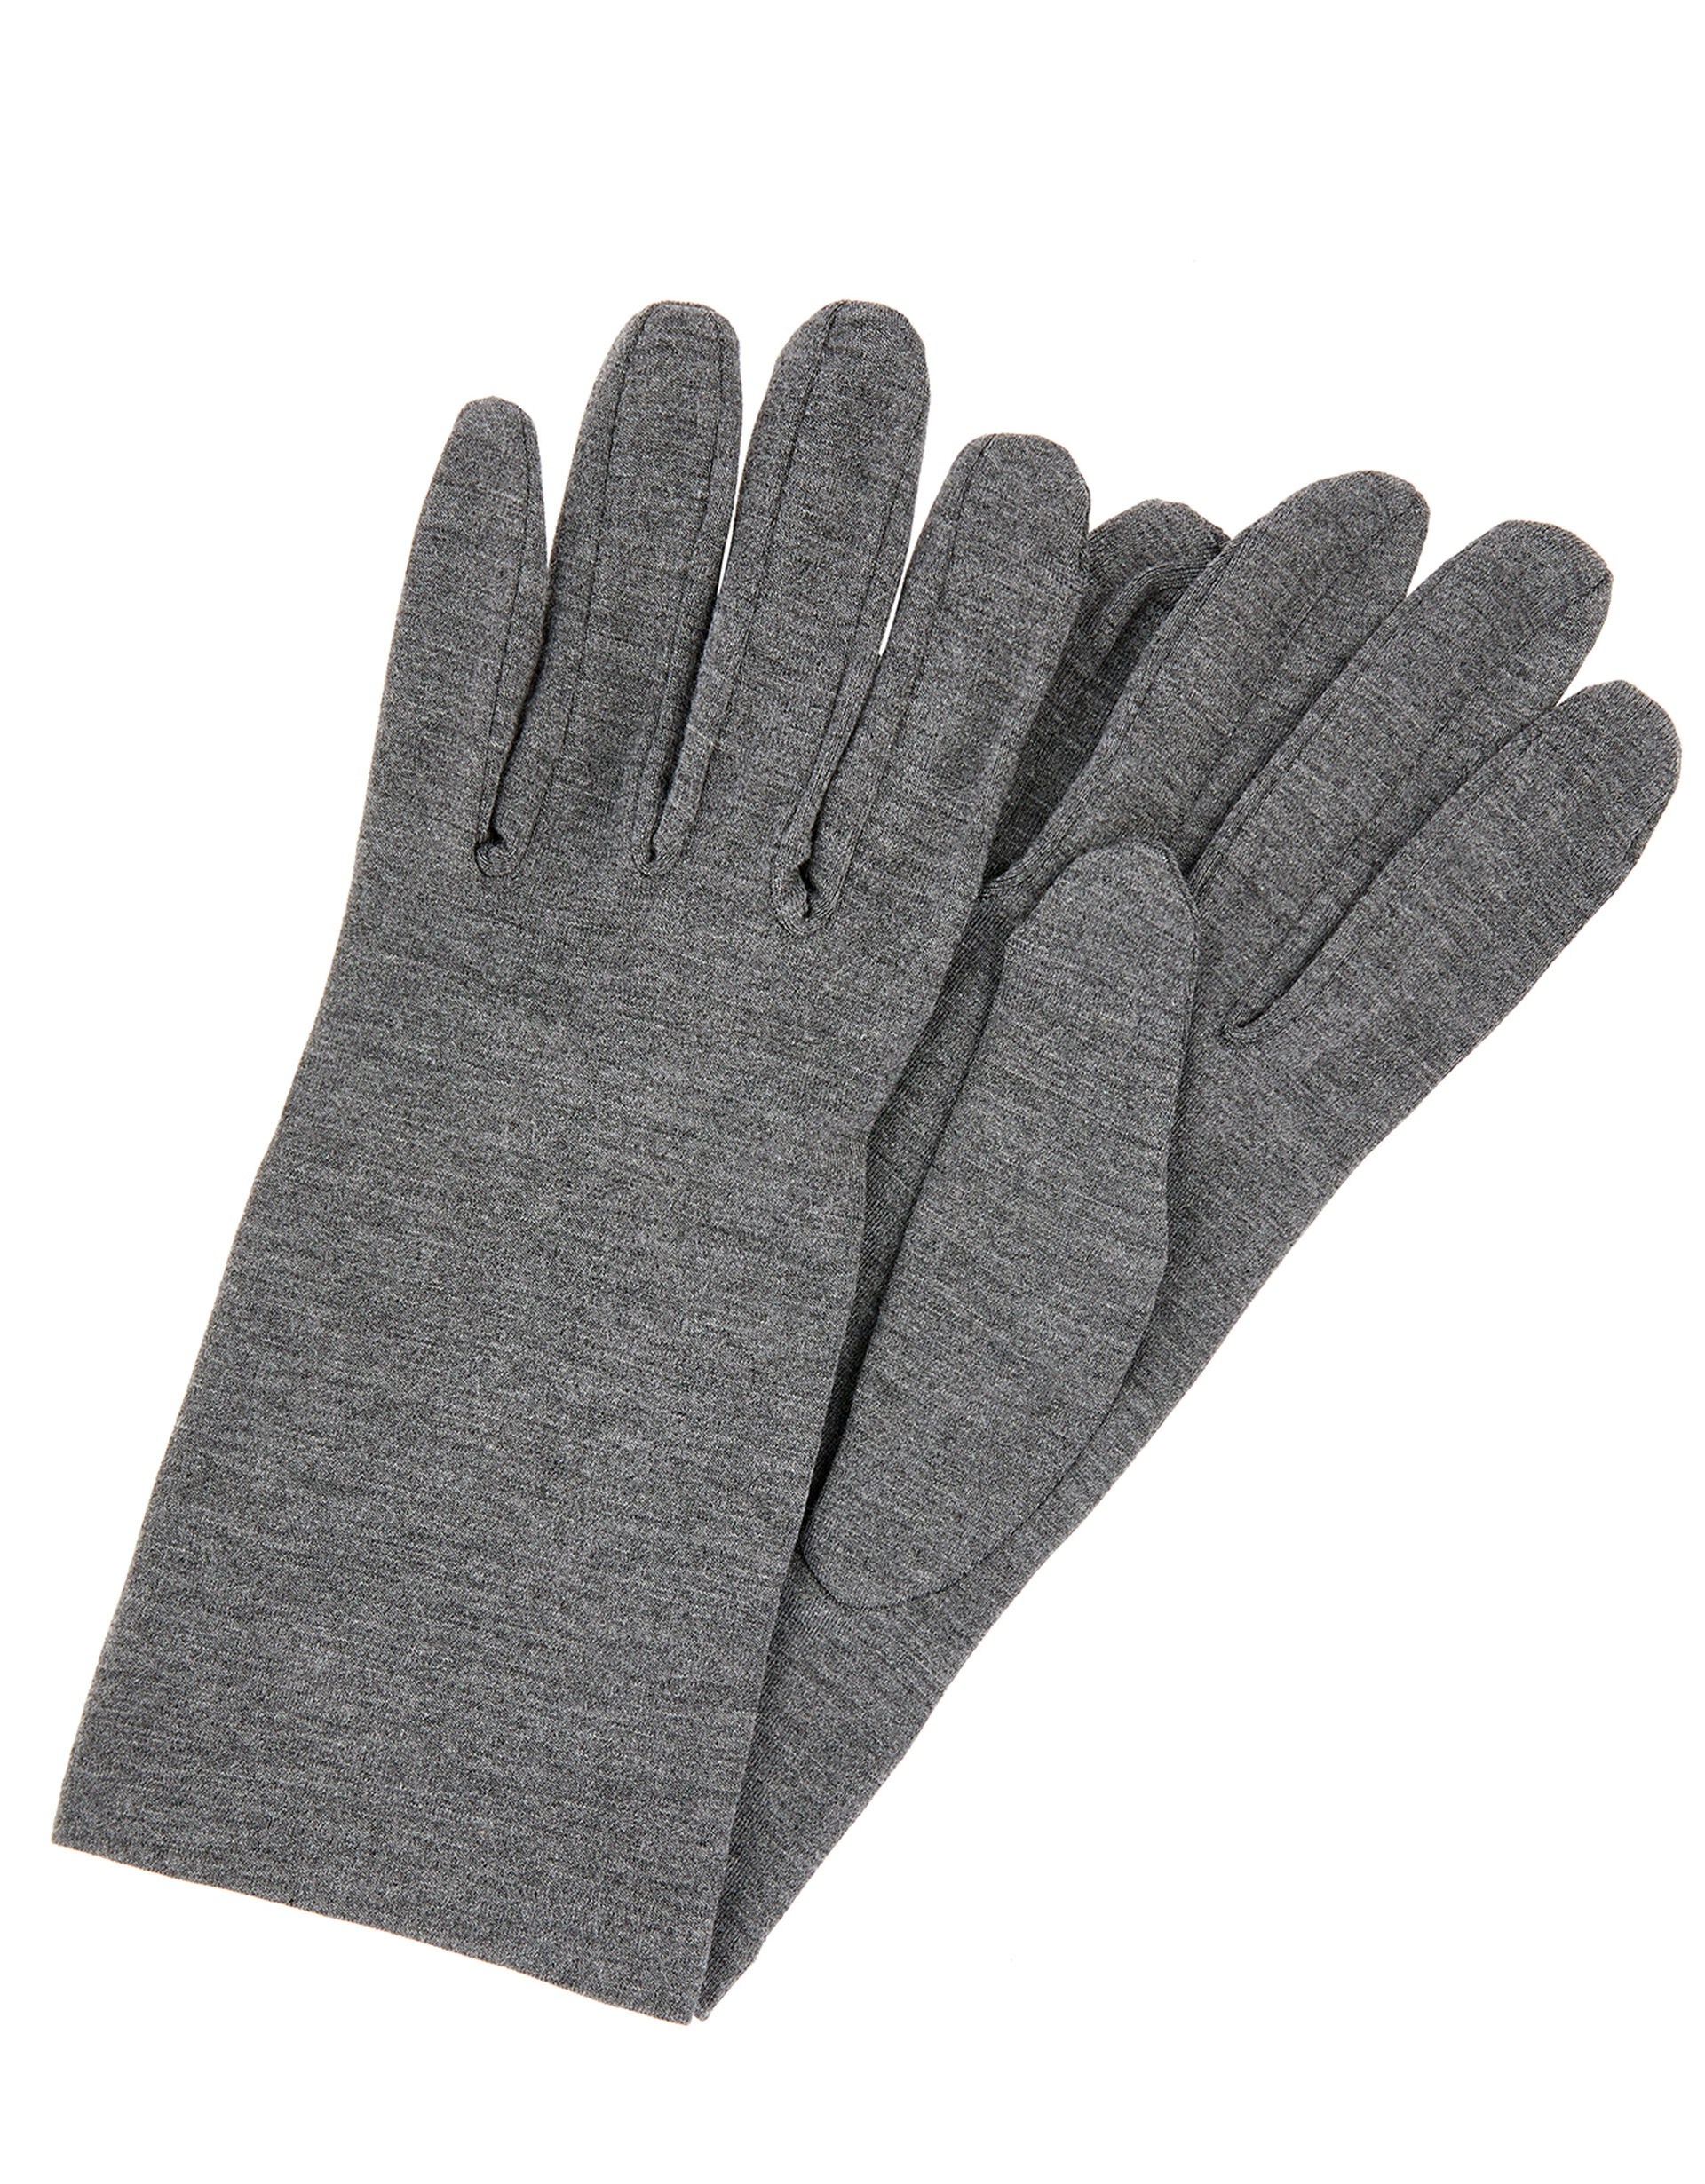 Bamboo Jersey Touch Screen Gloves, Grey (GREY), large